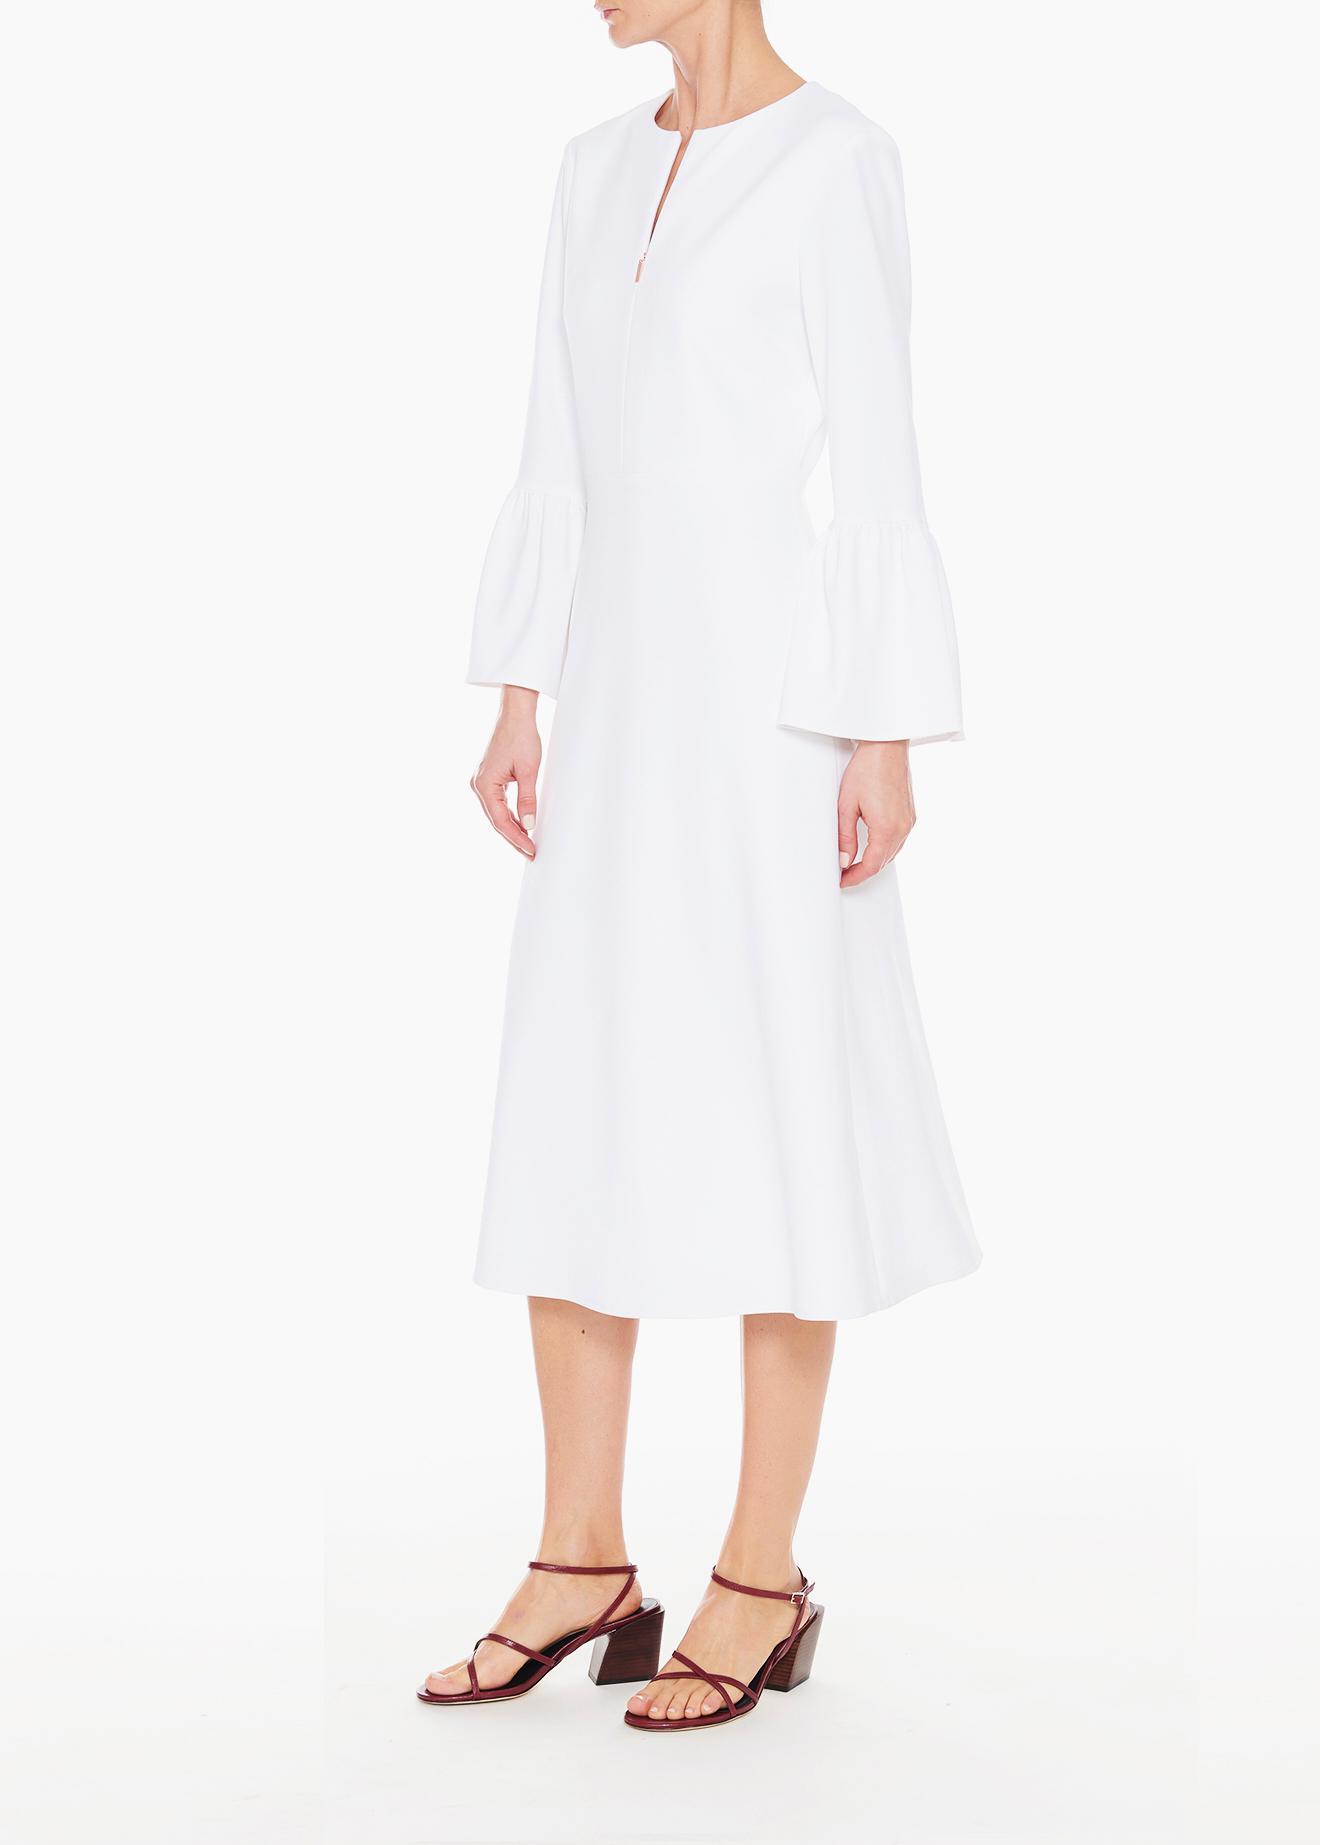 Tibi Synthetic Structured Crepe Vneck Ruffle Sleeve Midi Dress in White Lyst